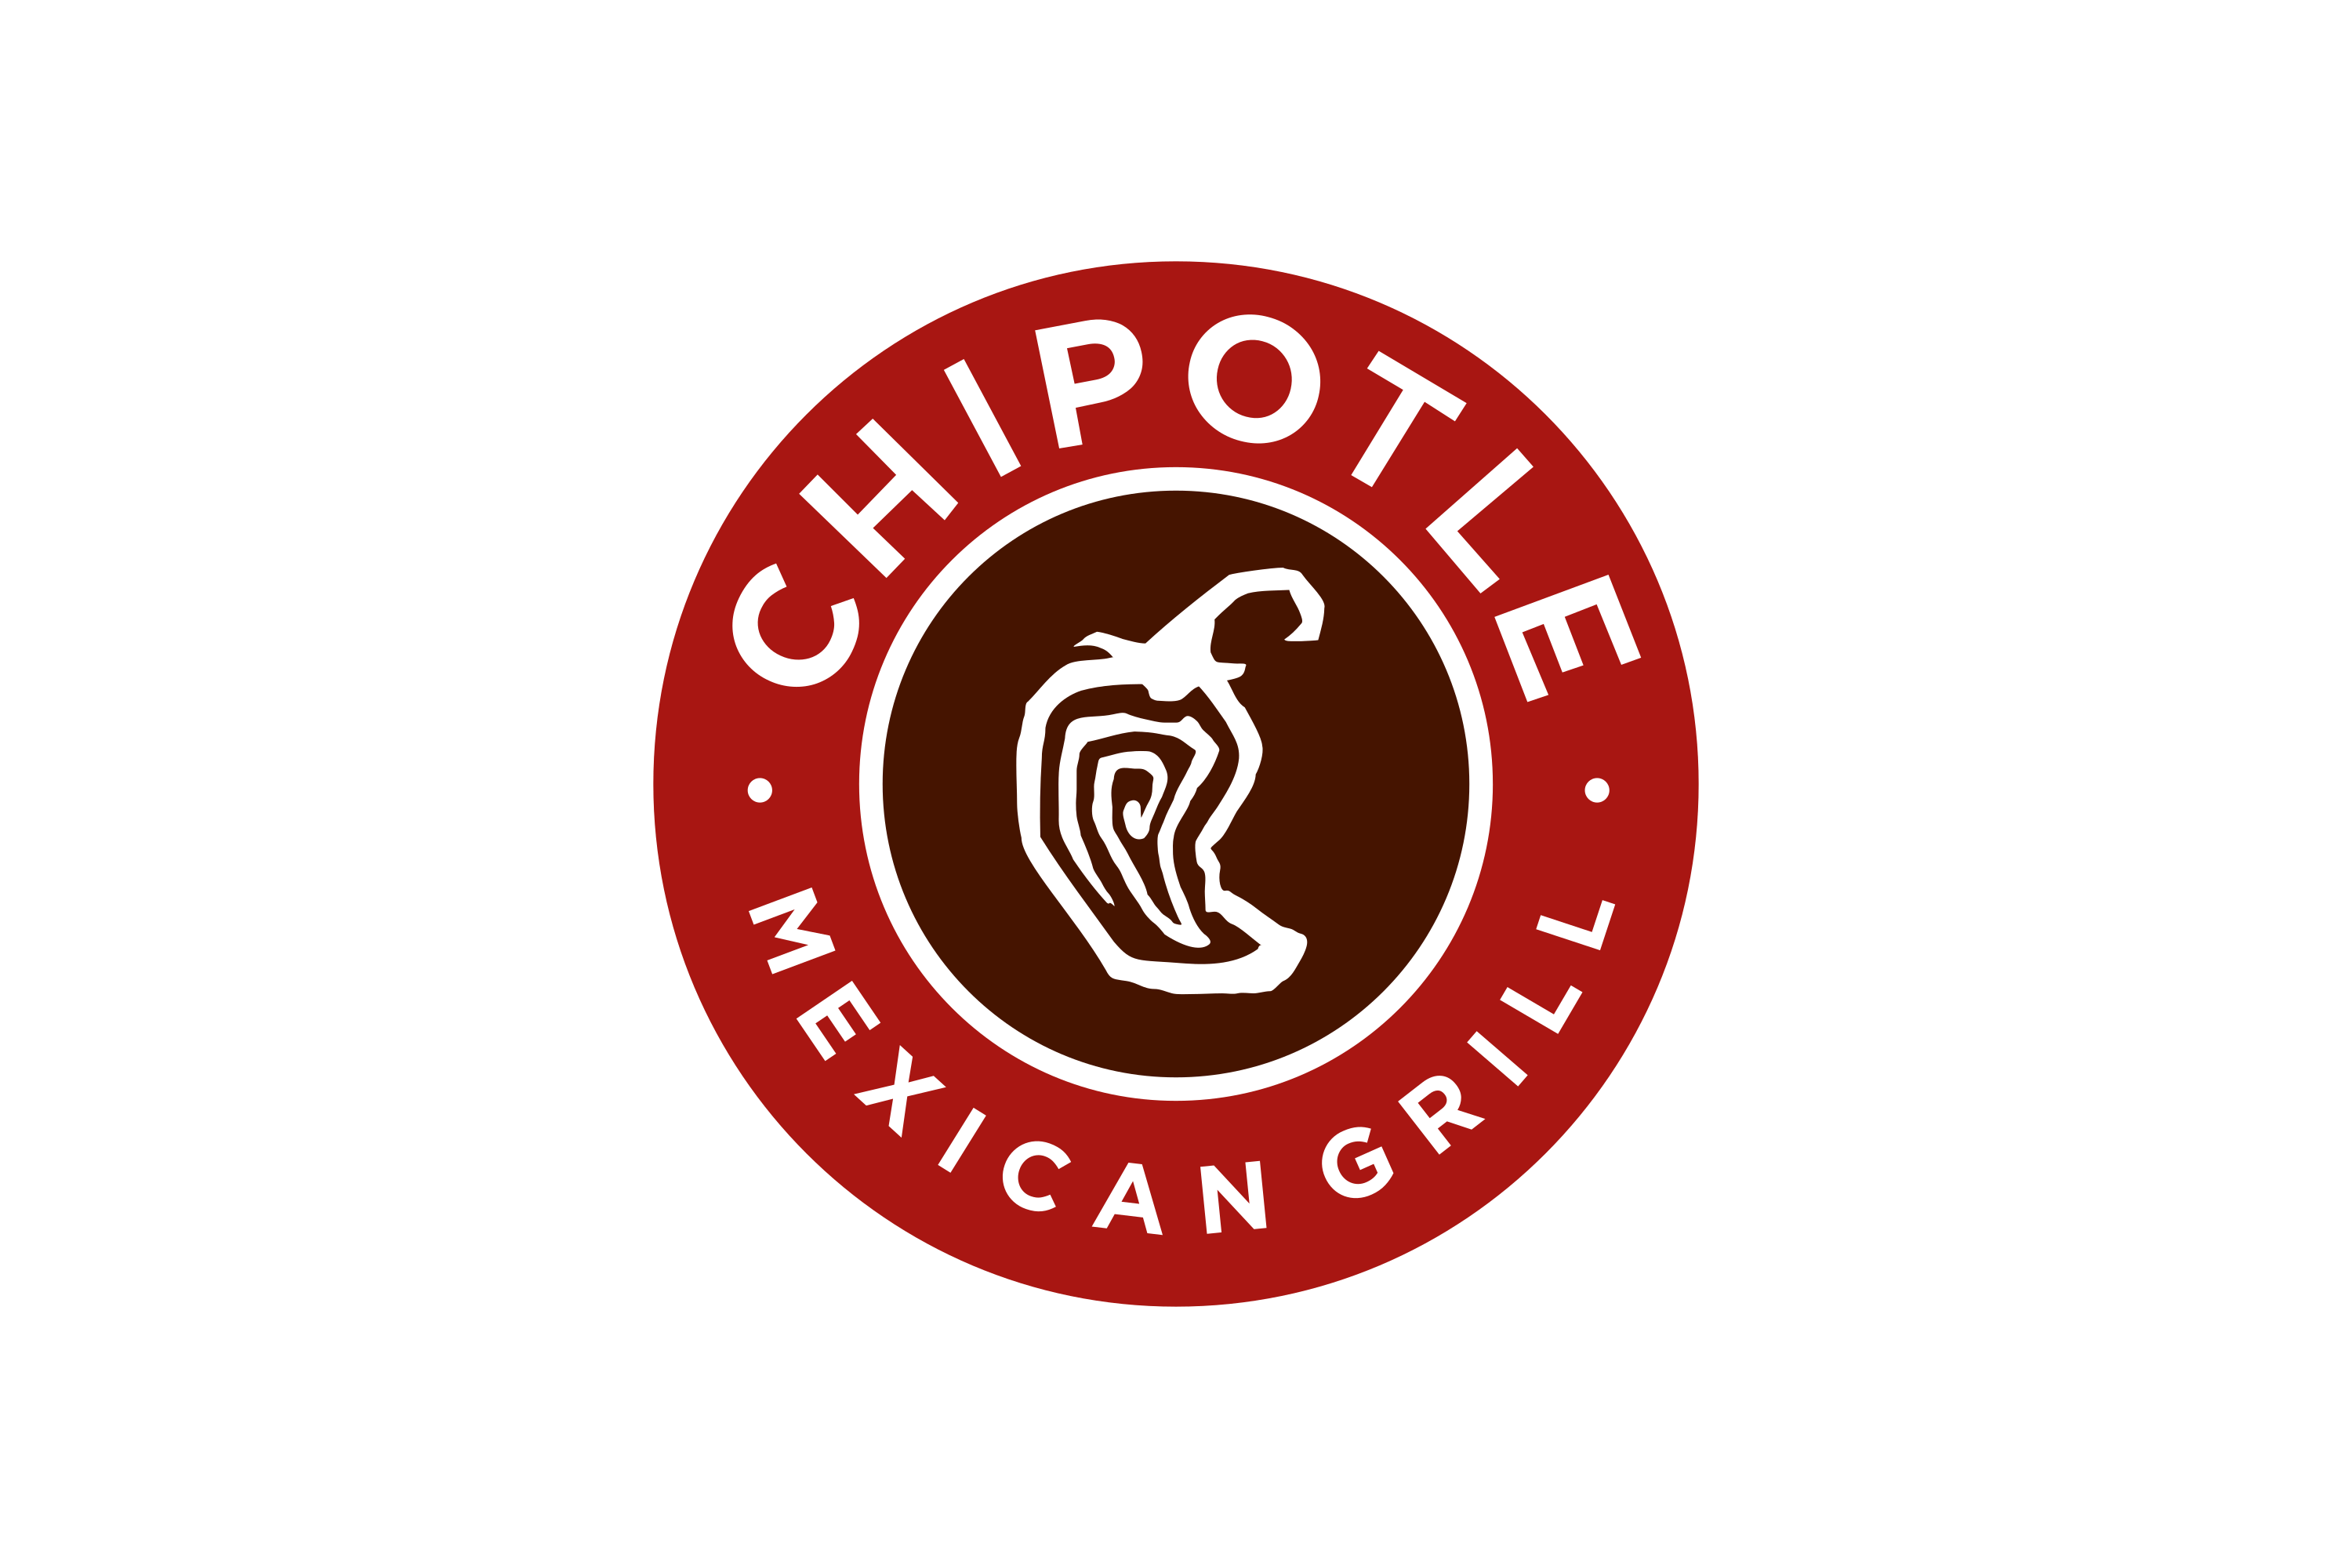 Download Chipotle Mexican Grill Logo in SVG Vector or PNG File Format